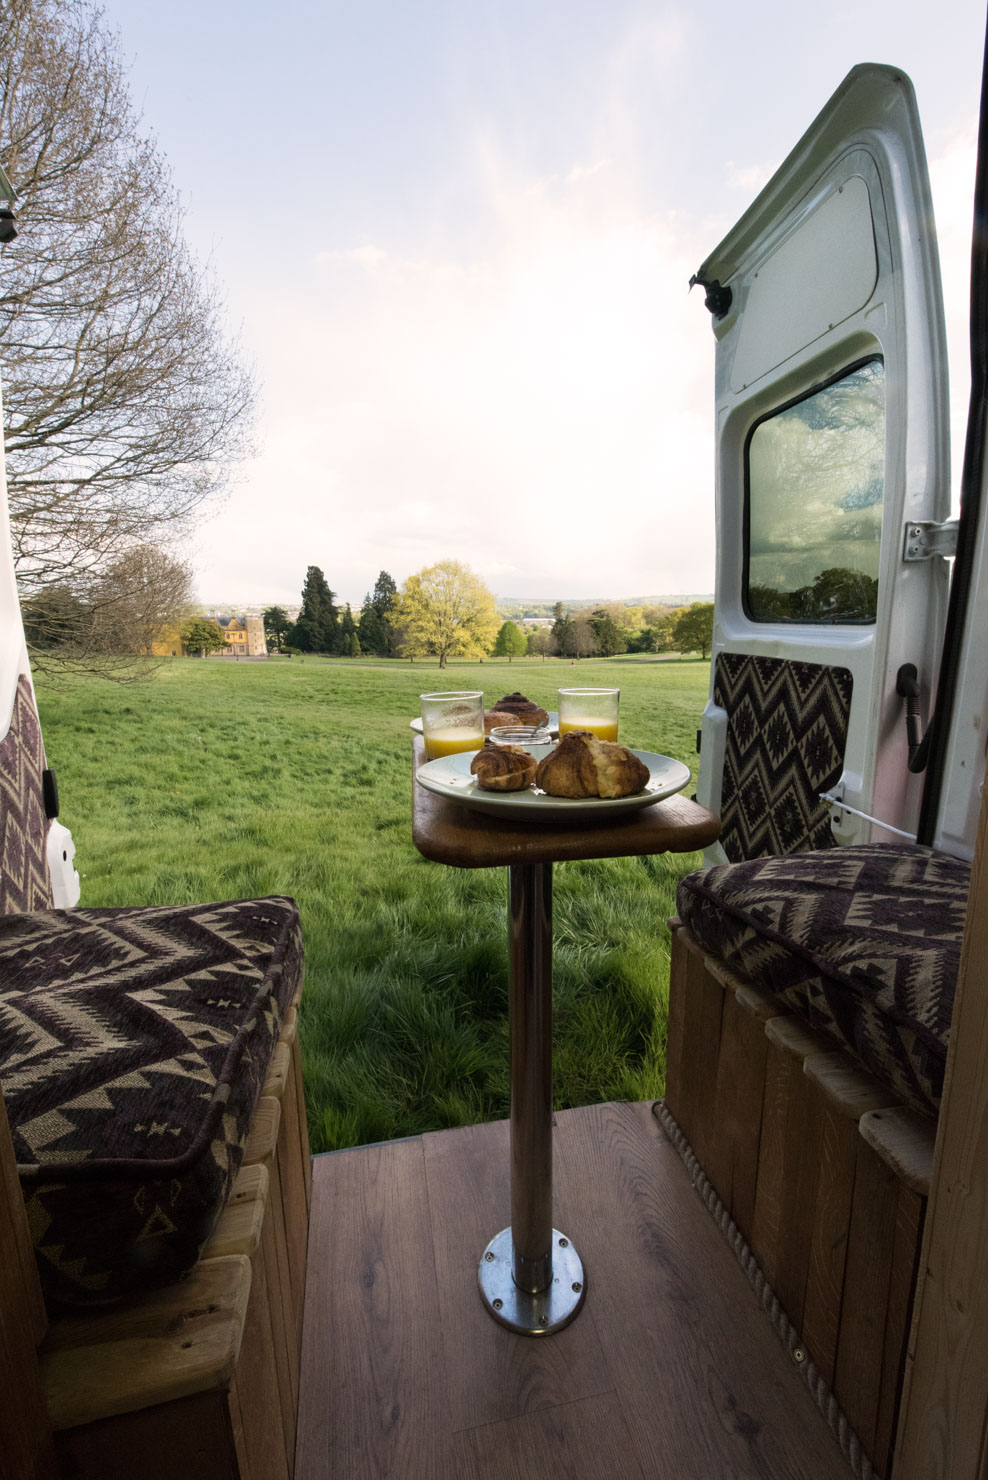 Interior view of a campervan's open back door overlooking a grassy field. Inside the van, a small wooden table is set with plates of pastries and glasses of juice. The van has cushioned seating with patterned upholstery. The background features trees and a partly cloudy sky.